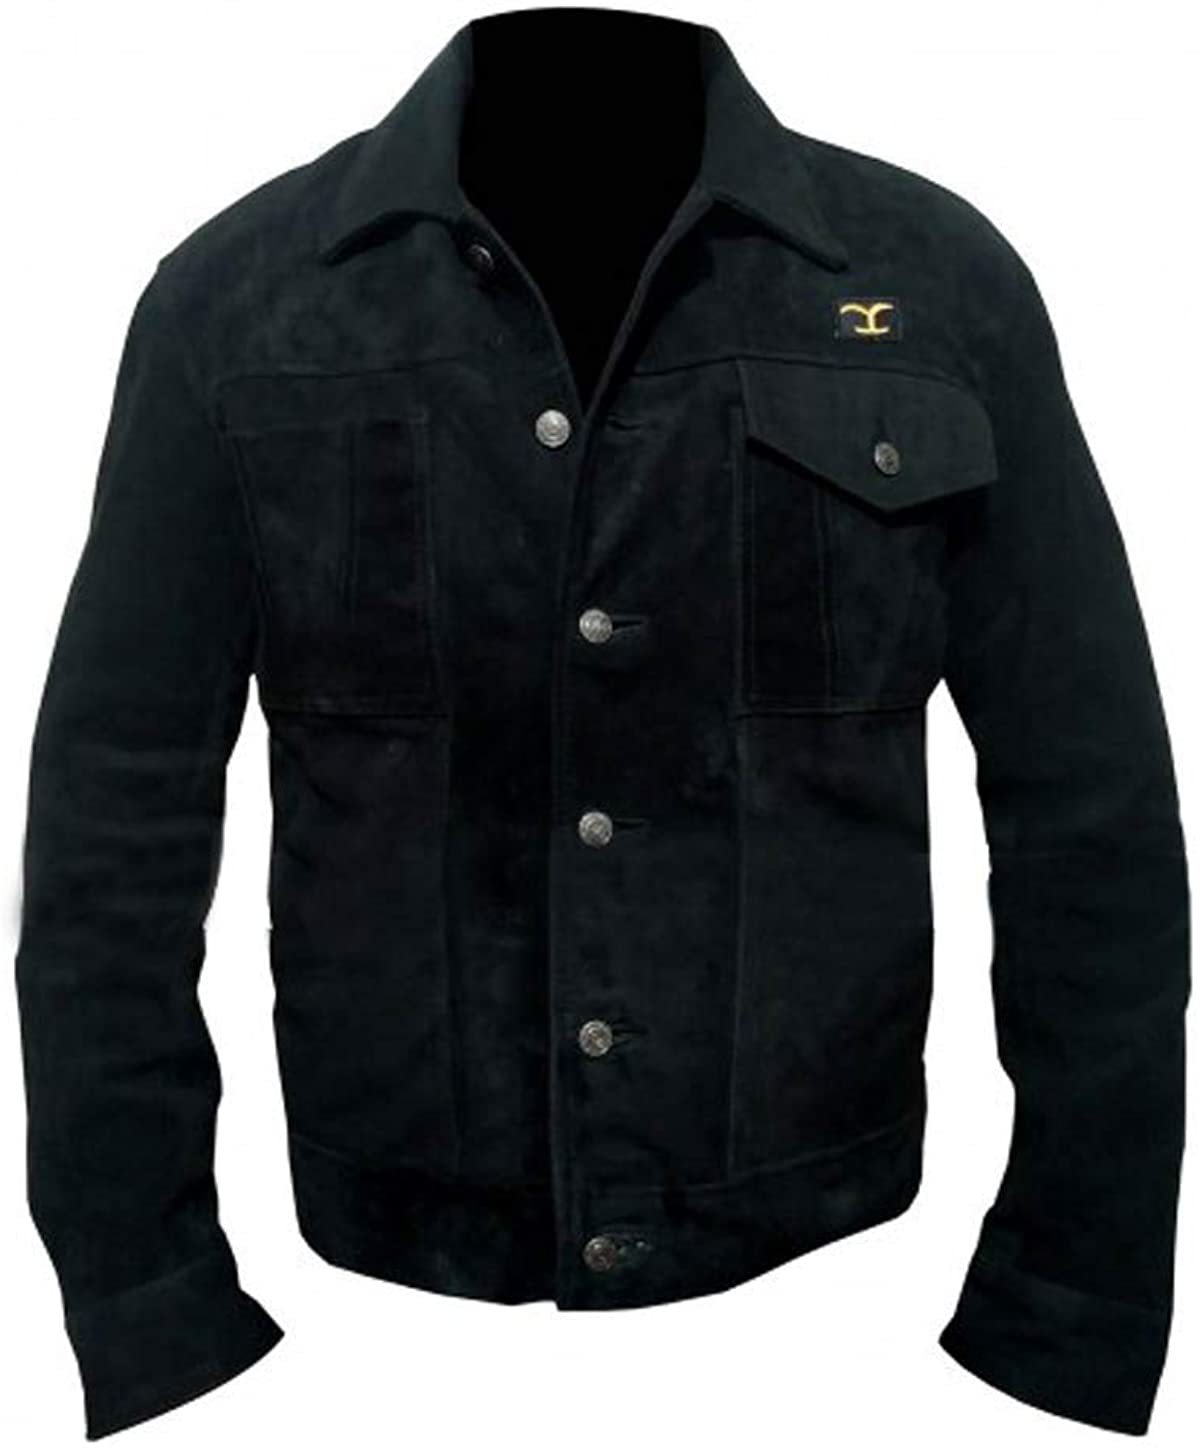 Rip Wheeler Yellowstone Cowboy Cole Hauser Suede Leather & Cotton Black jacket